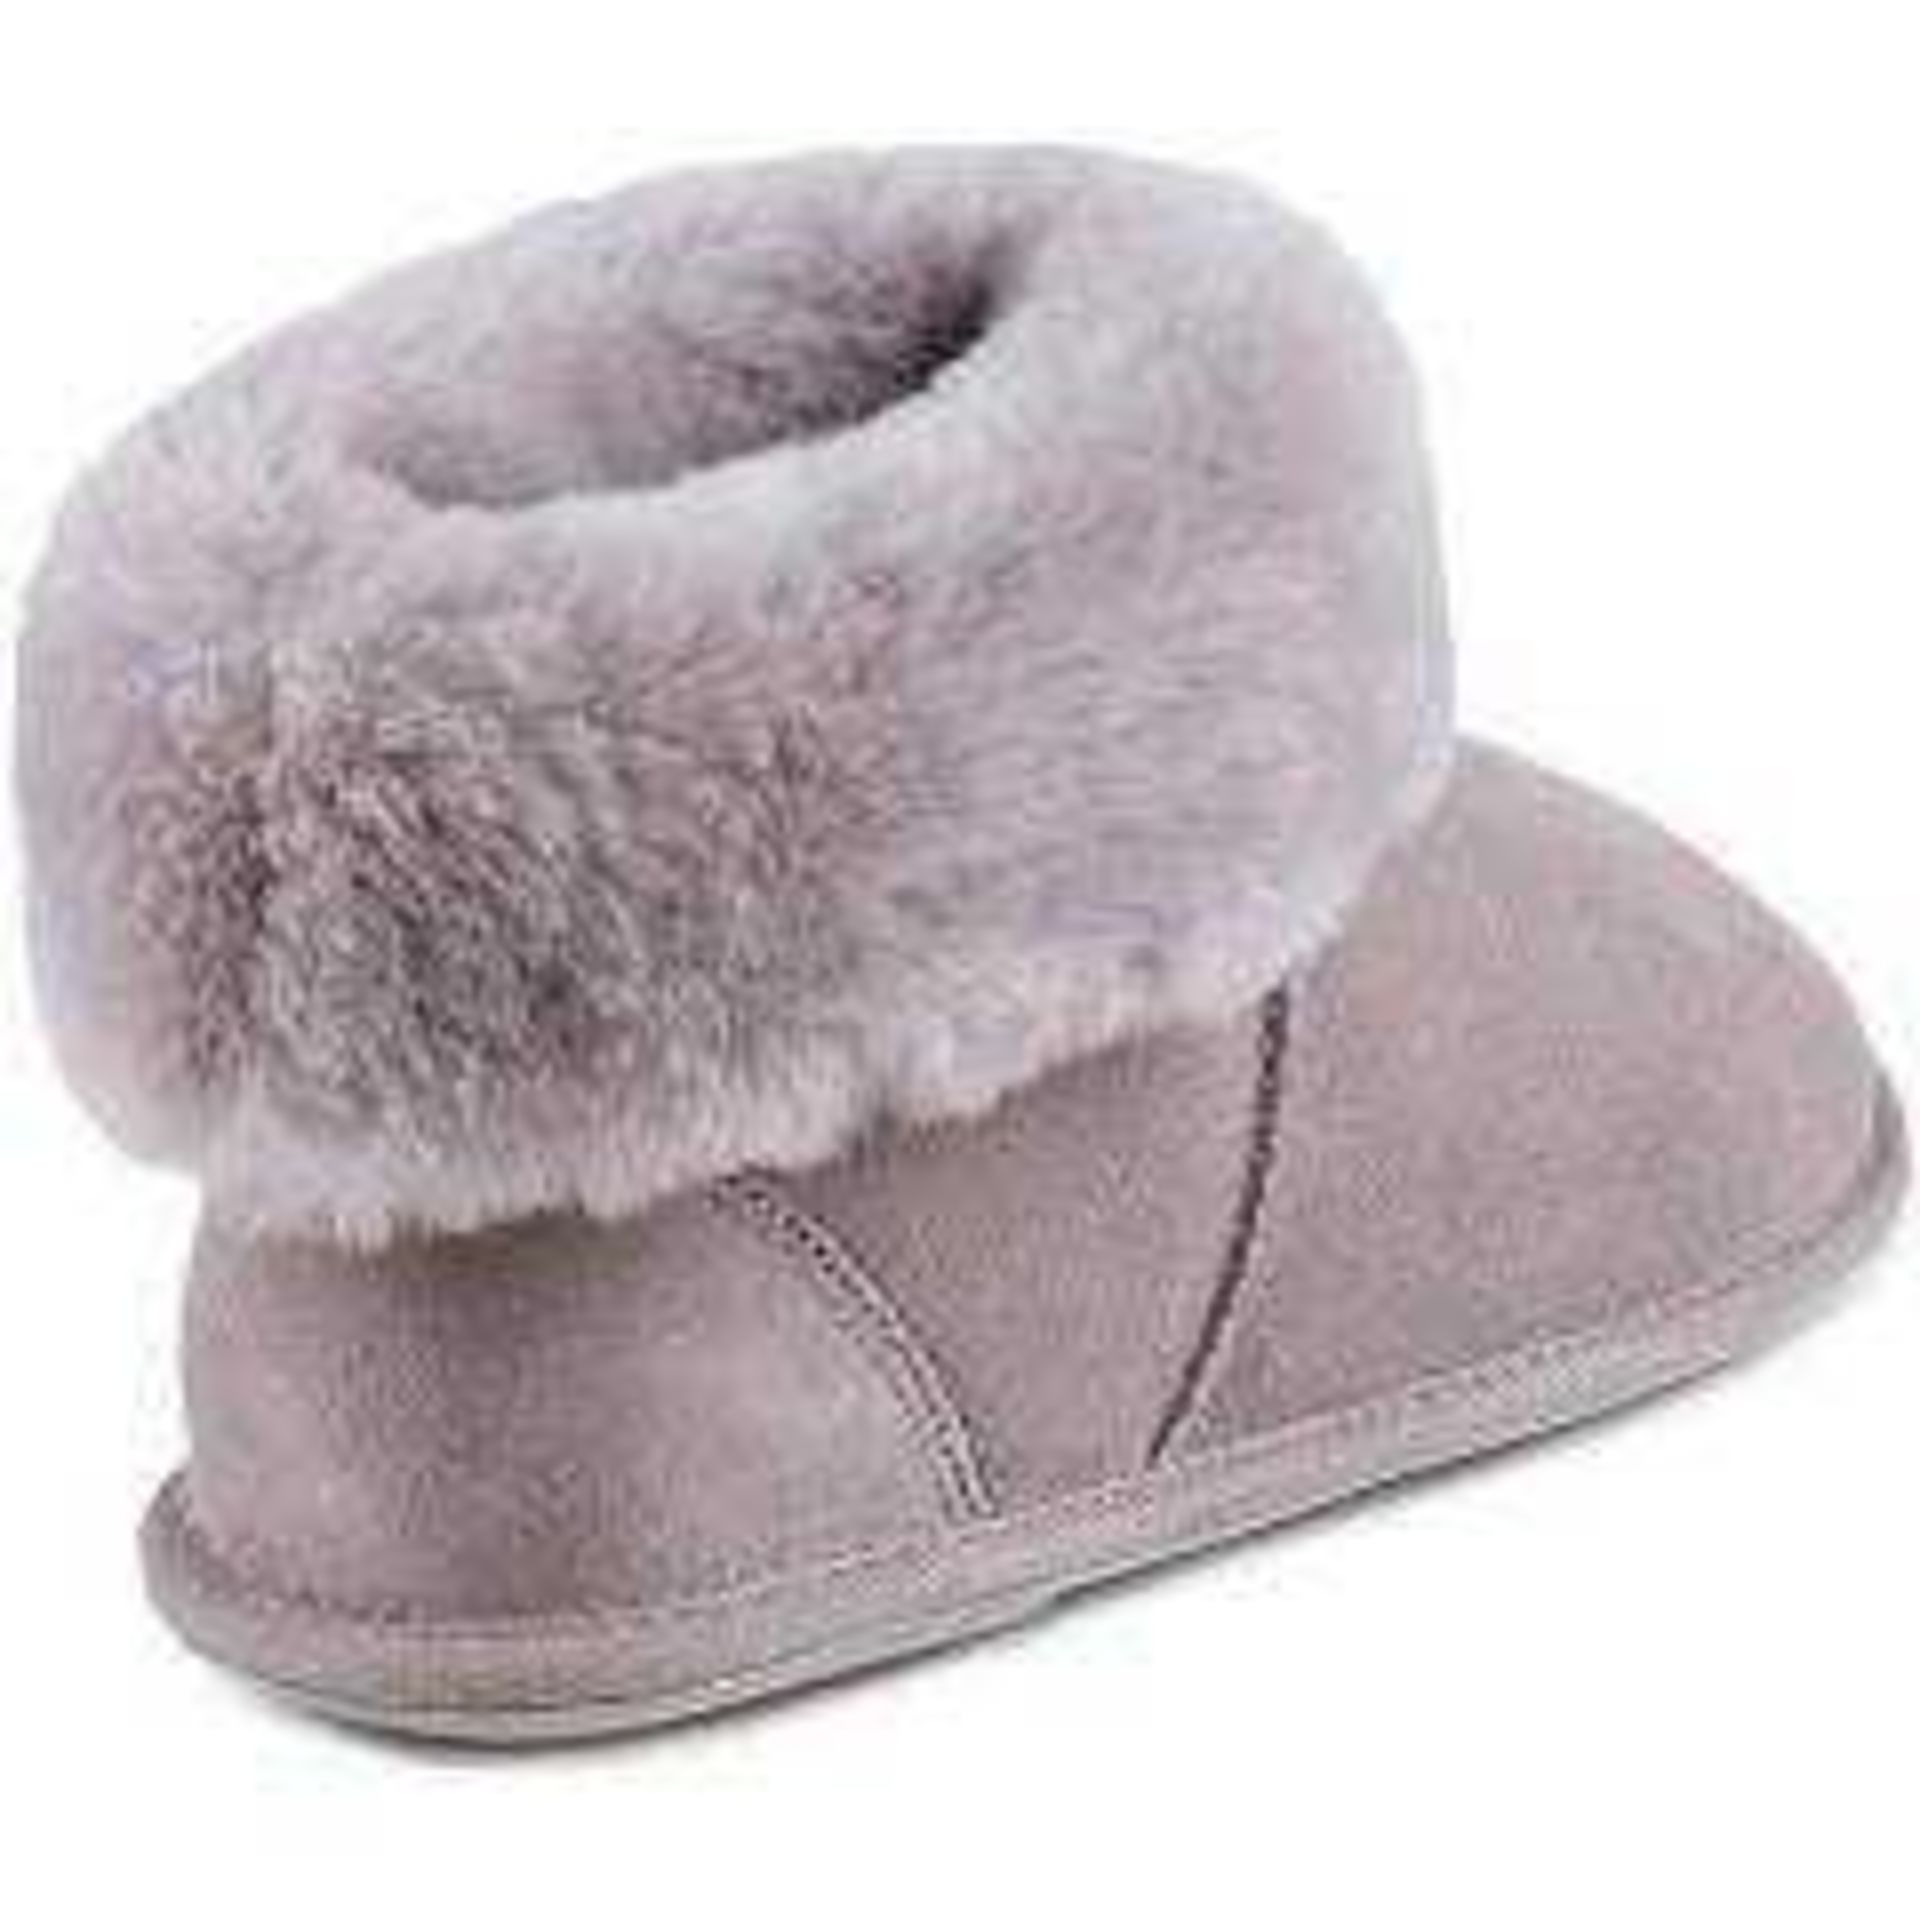 (Jb) RRP £200 To Contain 3 Boxed John Lewis And Partners Items To Include 100% Sheepskin Slippers In - Image 2 of 2